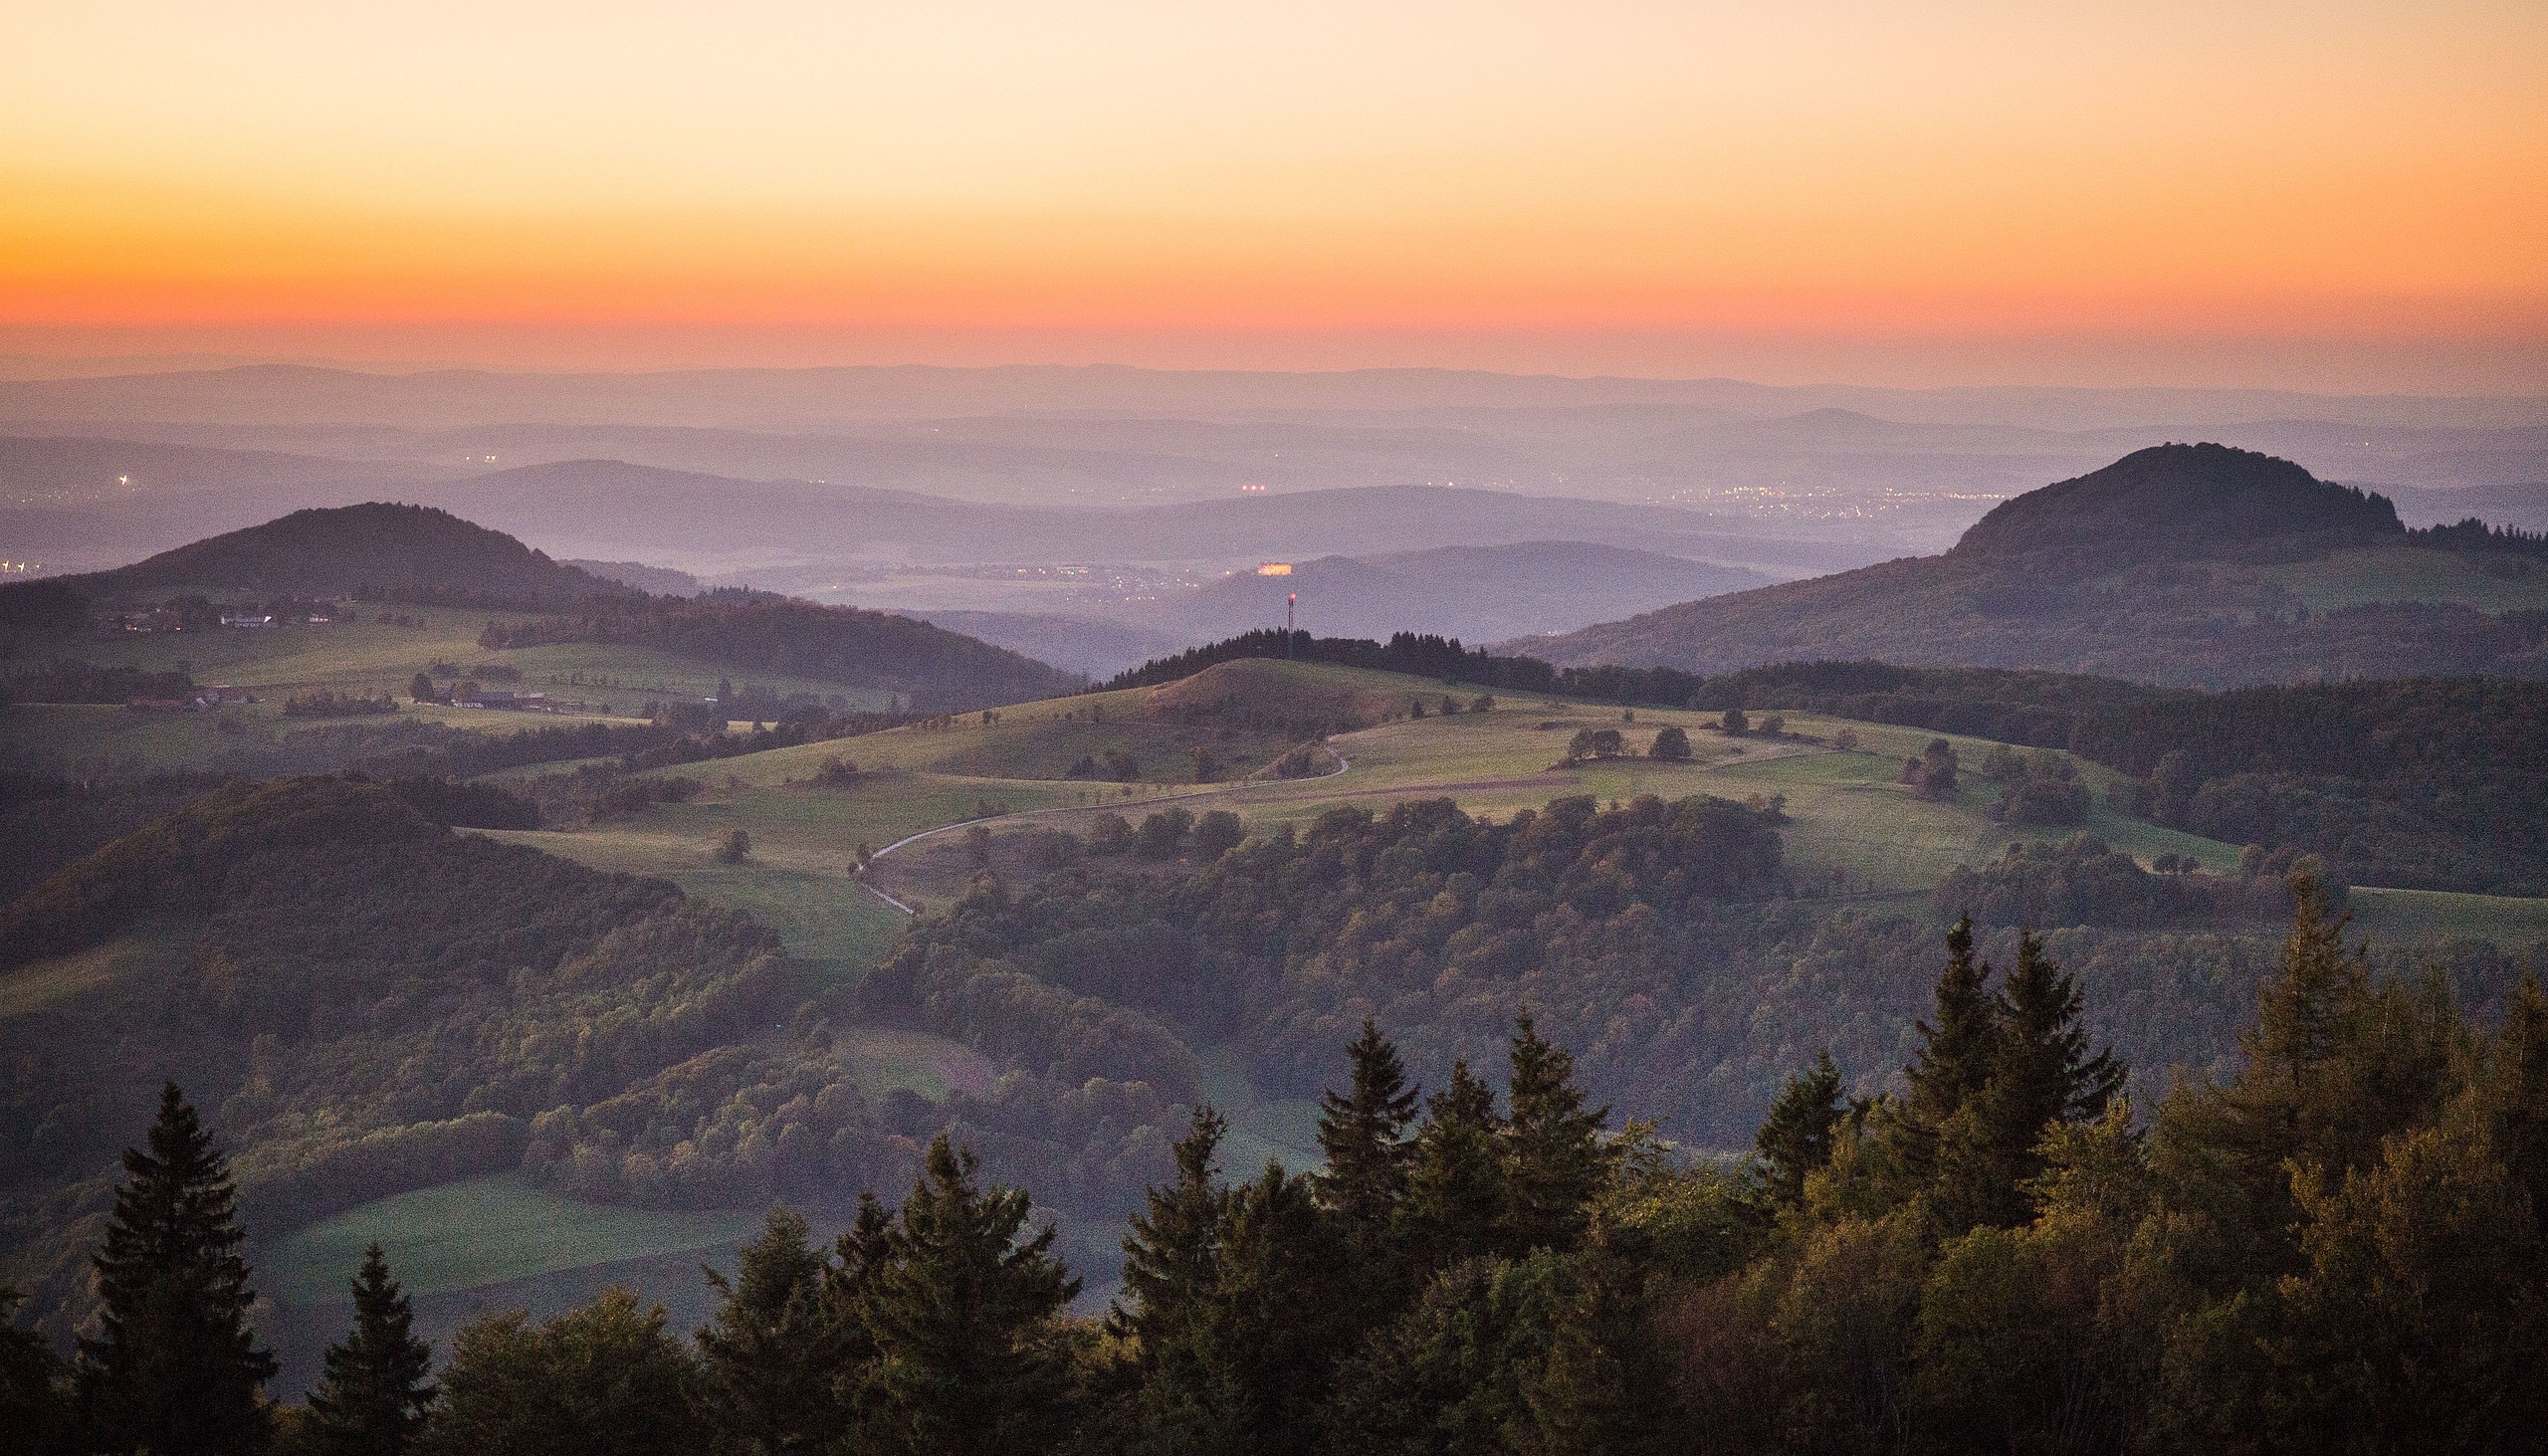 [Translate to English:] View of the Odenwald at dusk